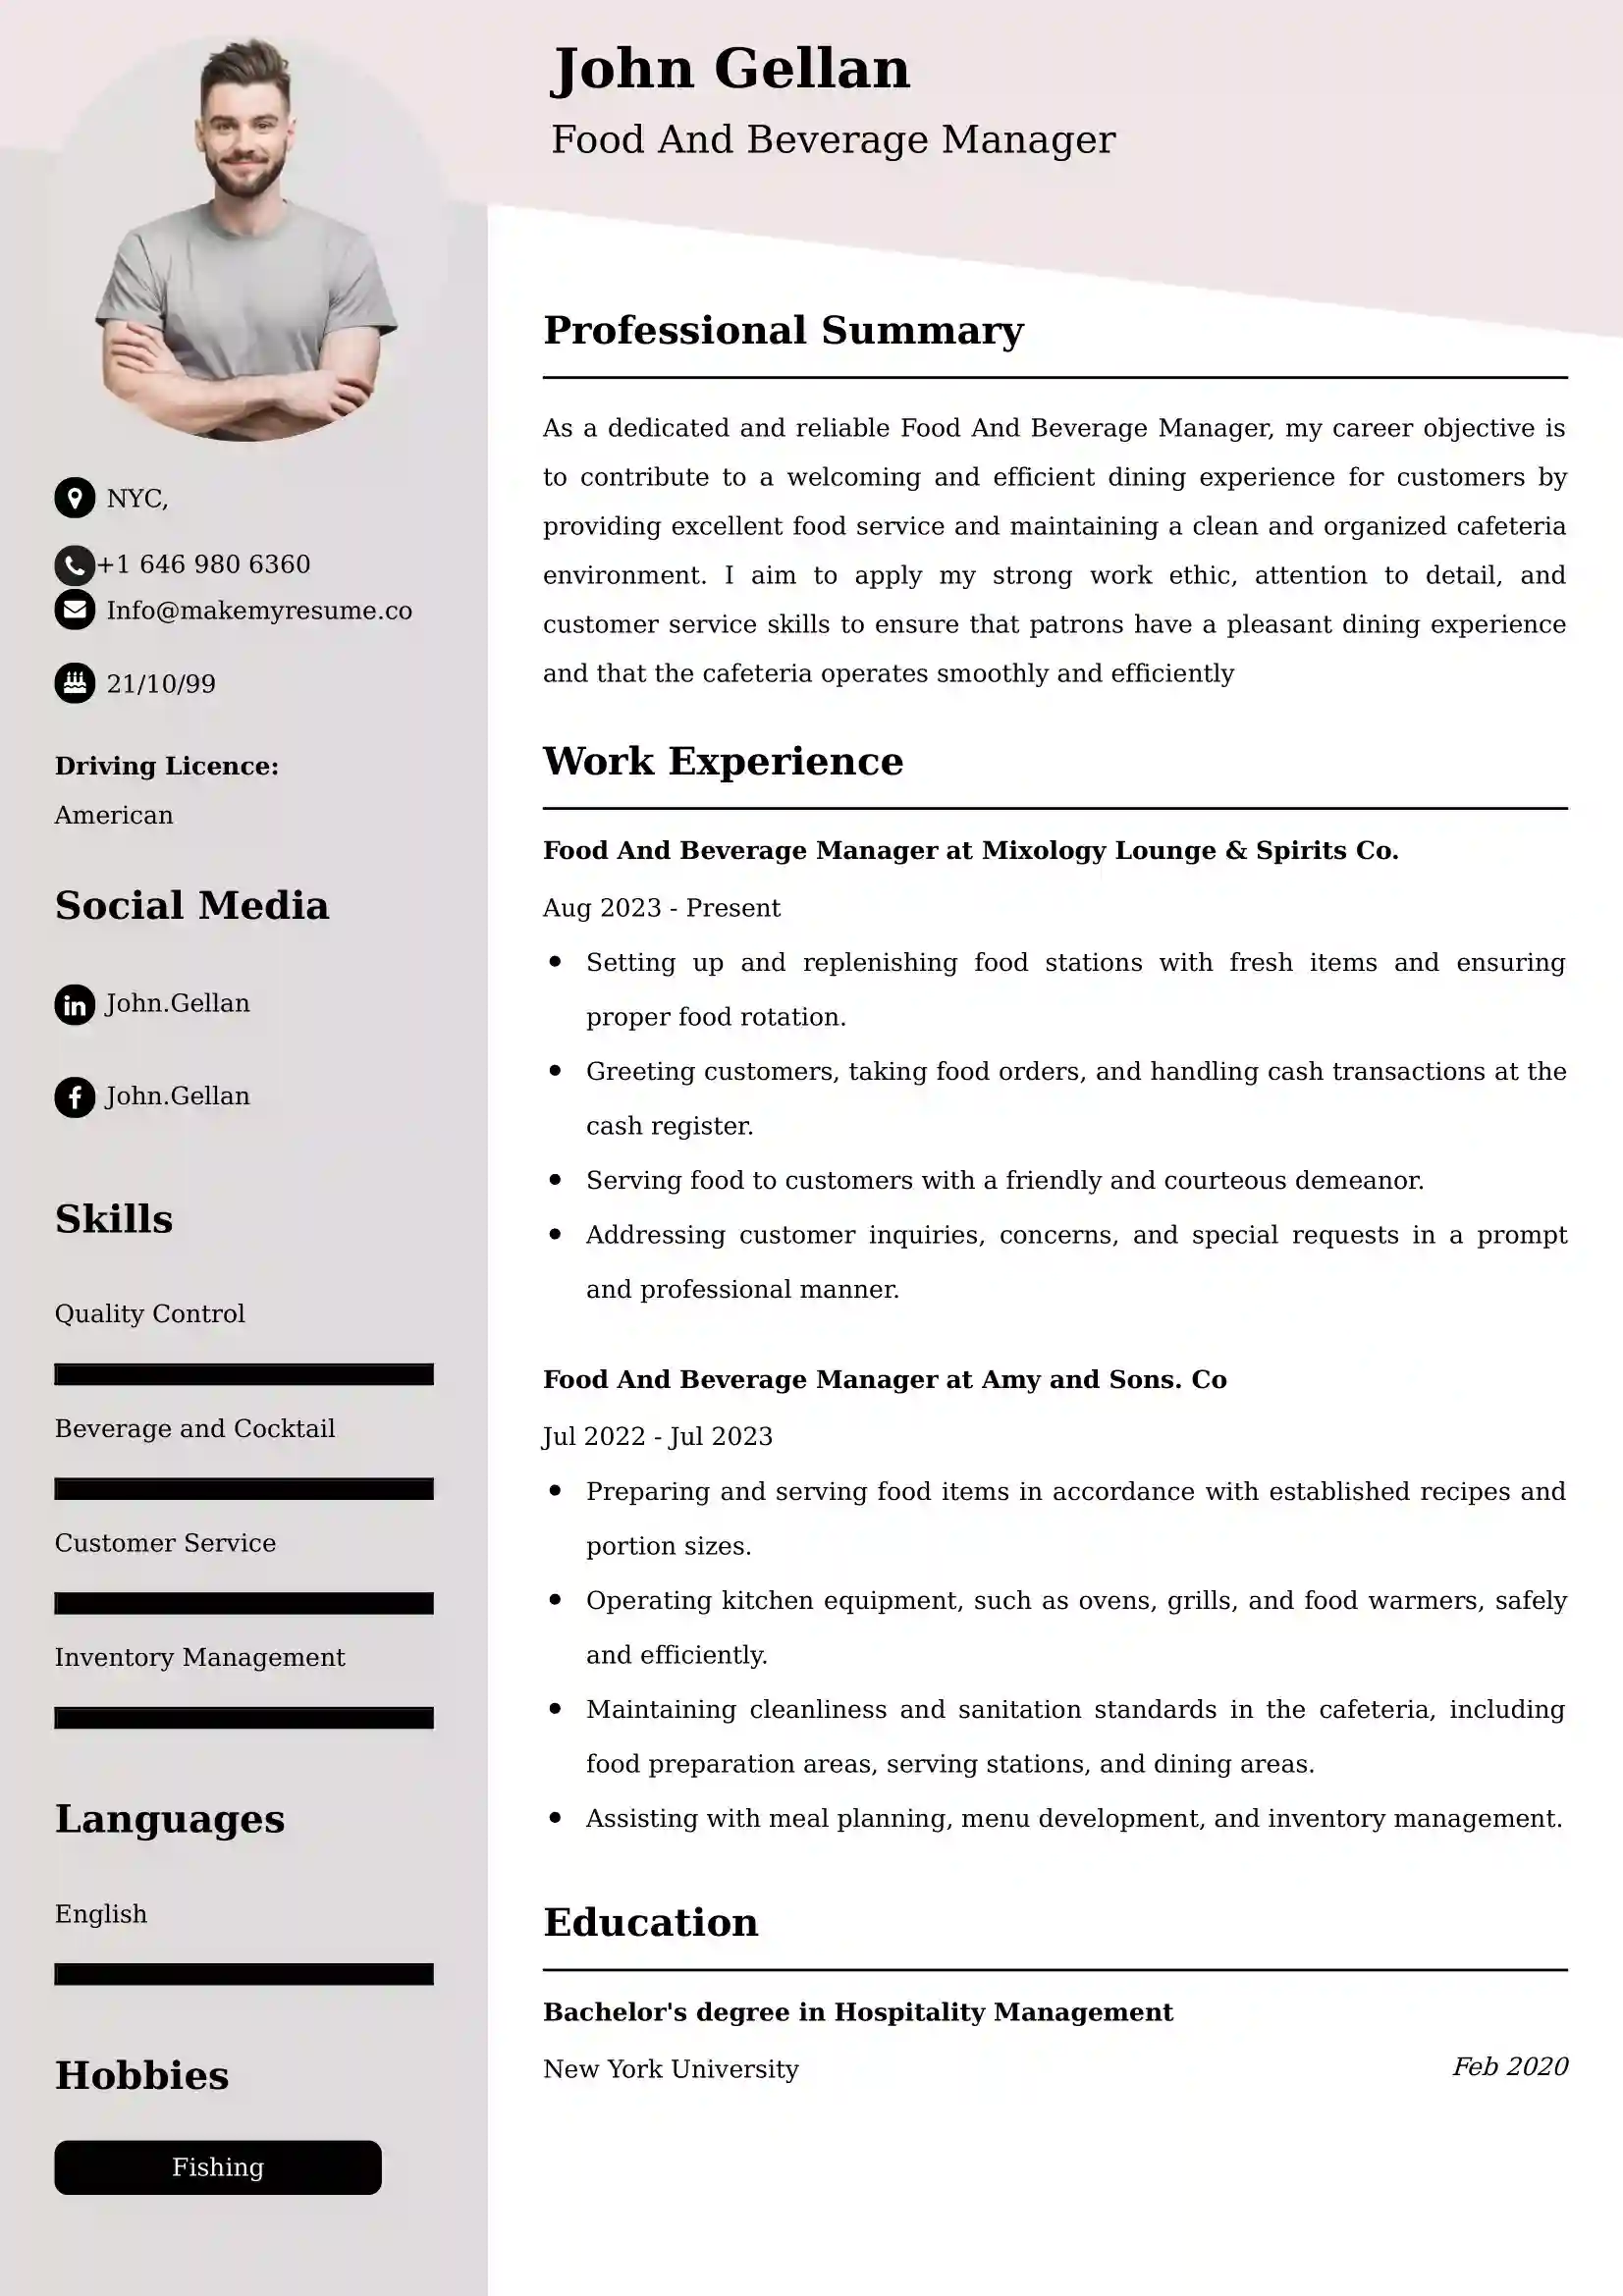 Food And Beverage Manager Resume Examples for UK Jobs - Tips and Guide